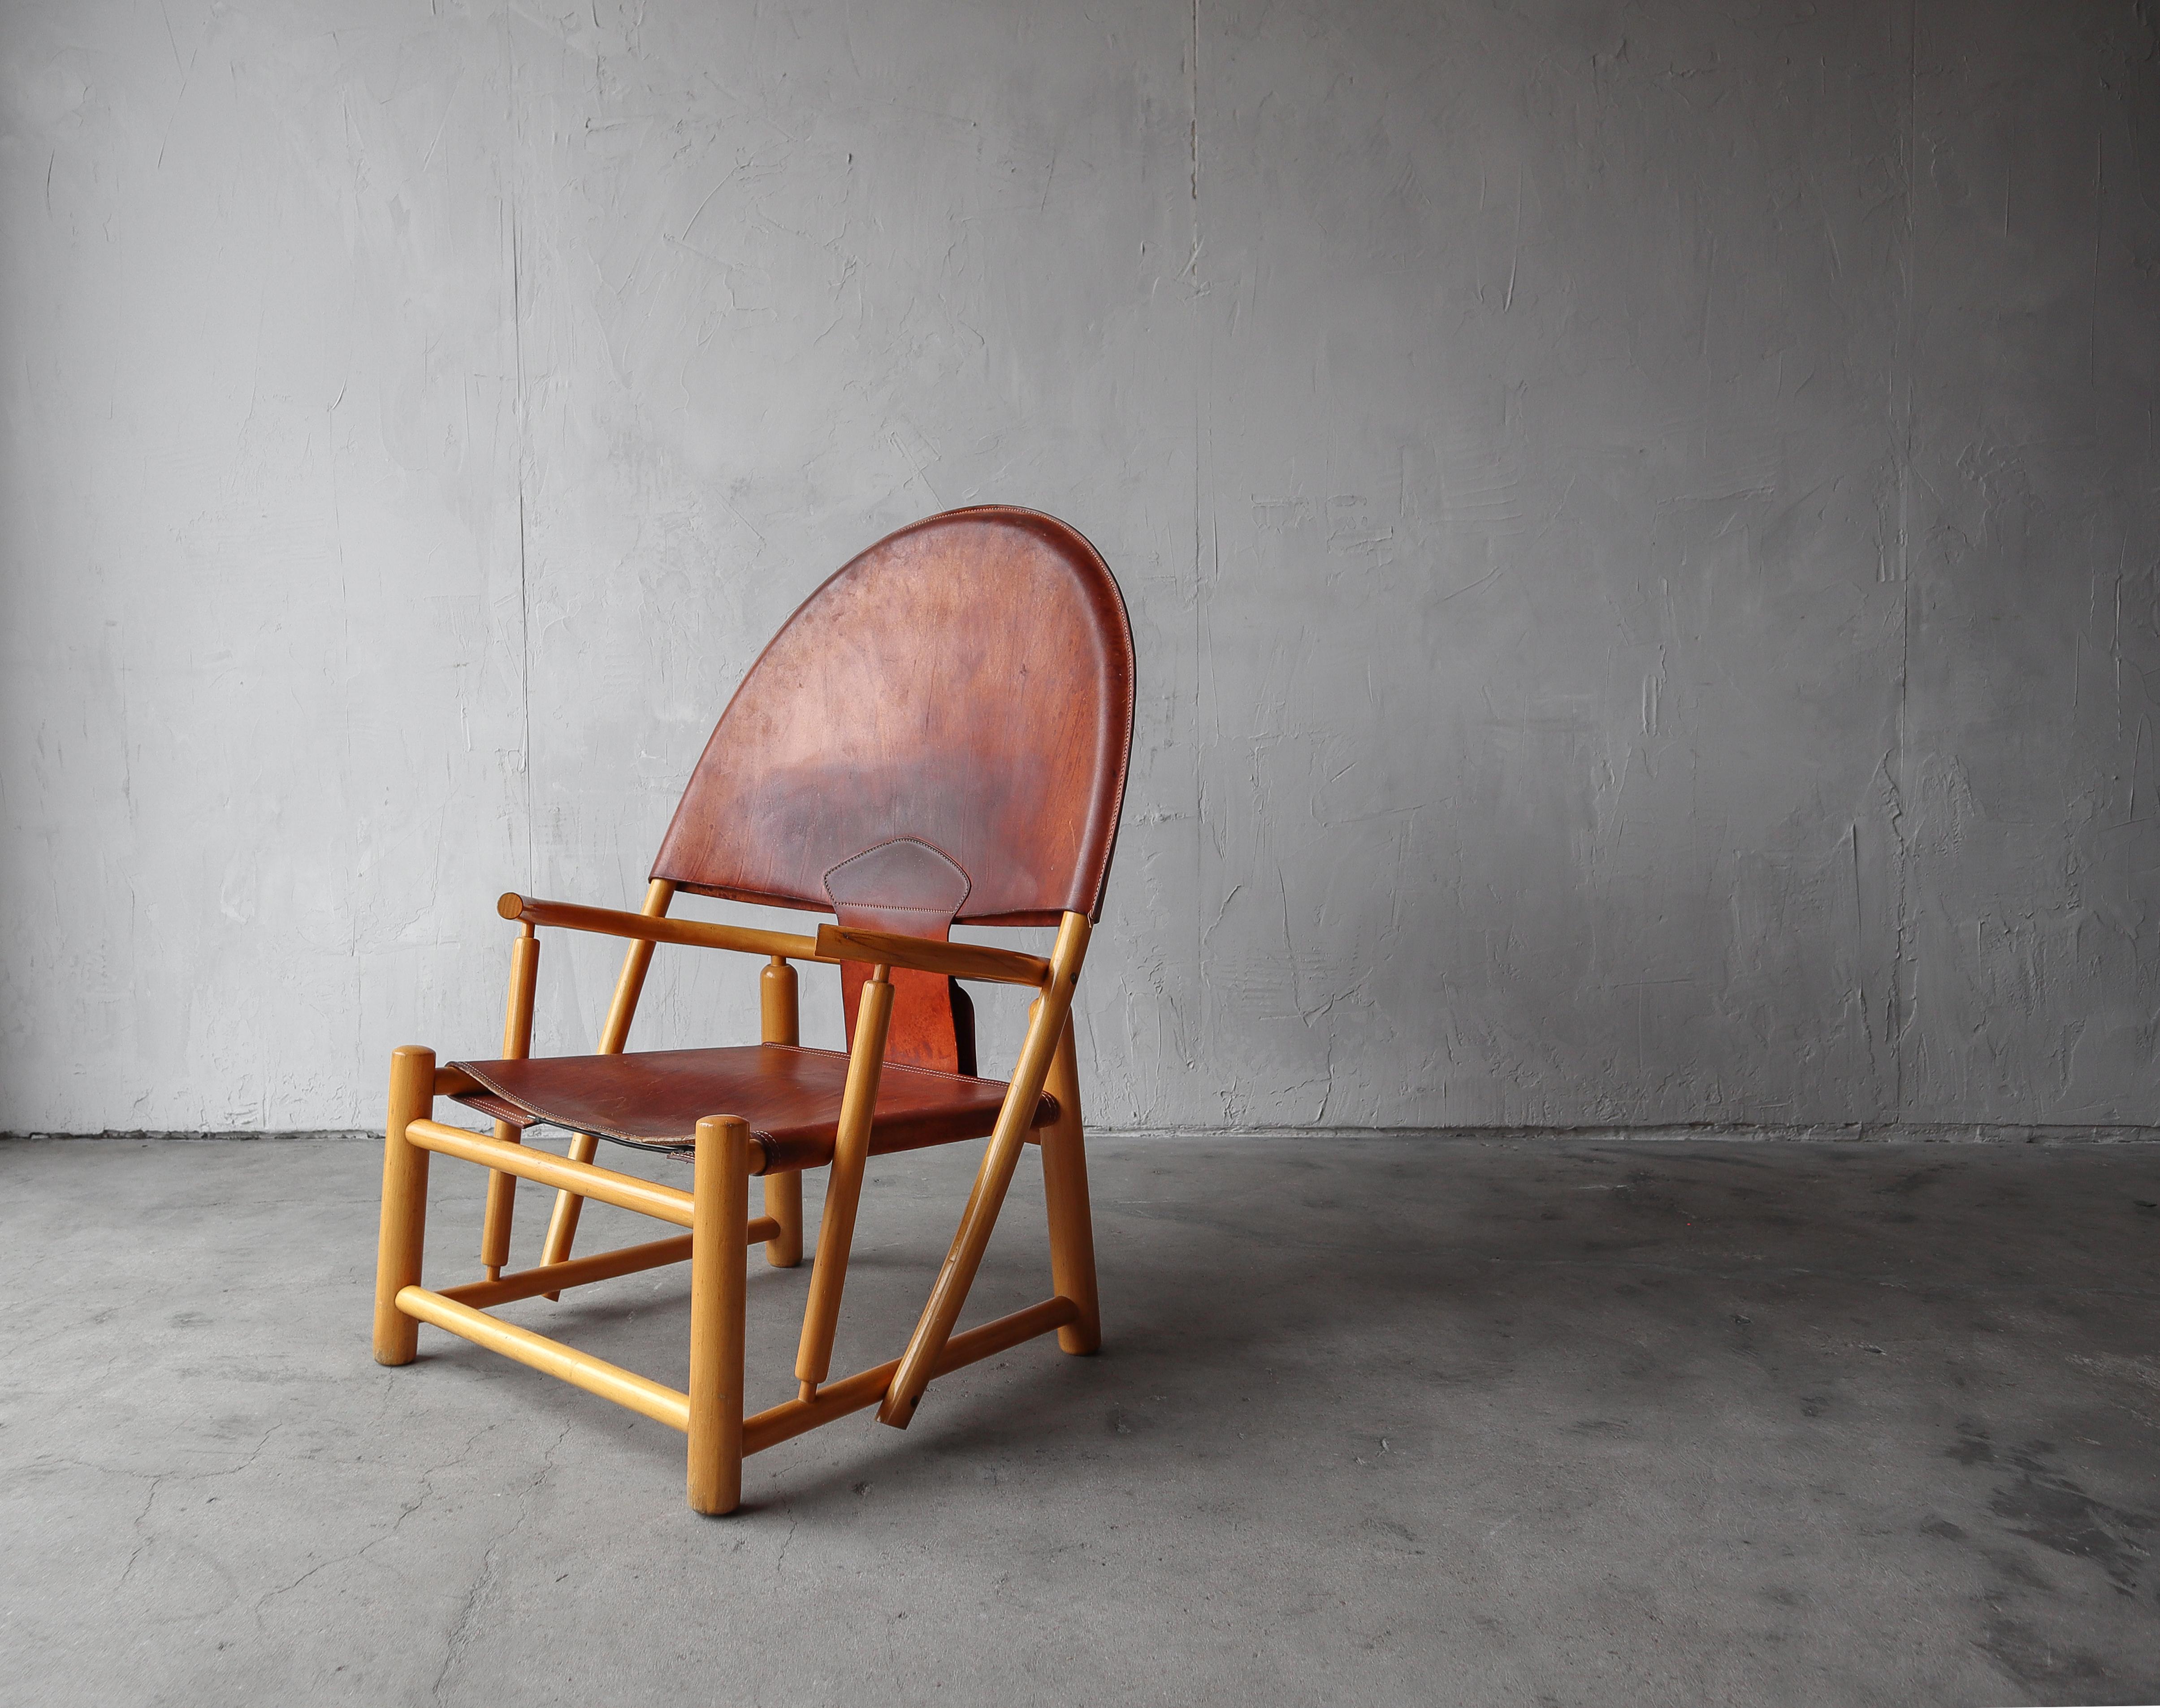 Oversized and huge on character and style this G23 Hoop chair design by Piero Palange and Werther Toffoloni for Germa is truly a masterpiece. An elegant curvacious solid maple frame combined with beautifully patinated leather seat. A beautiful